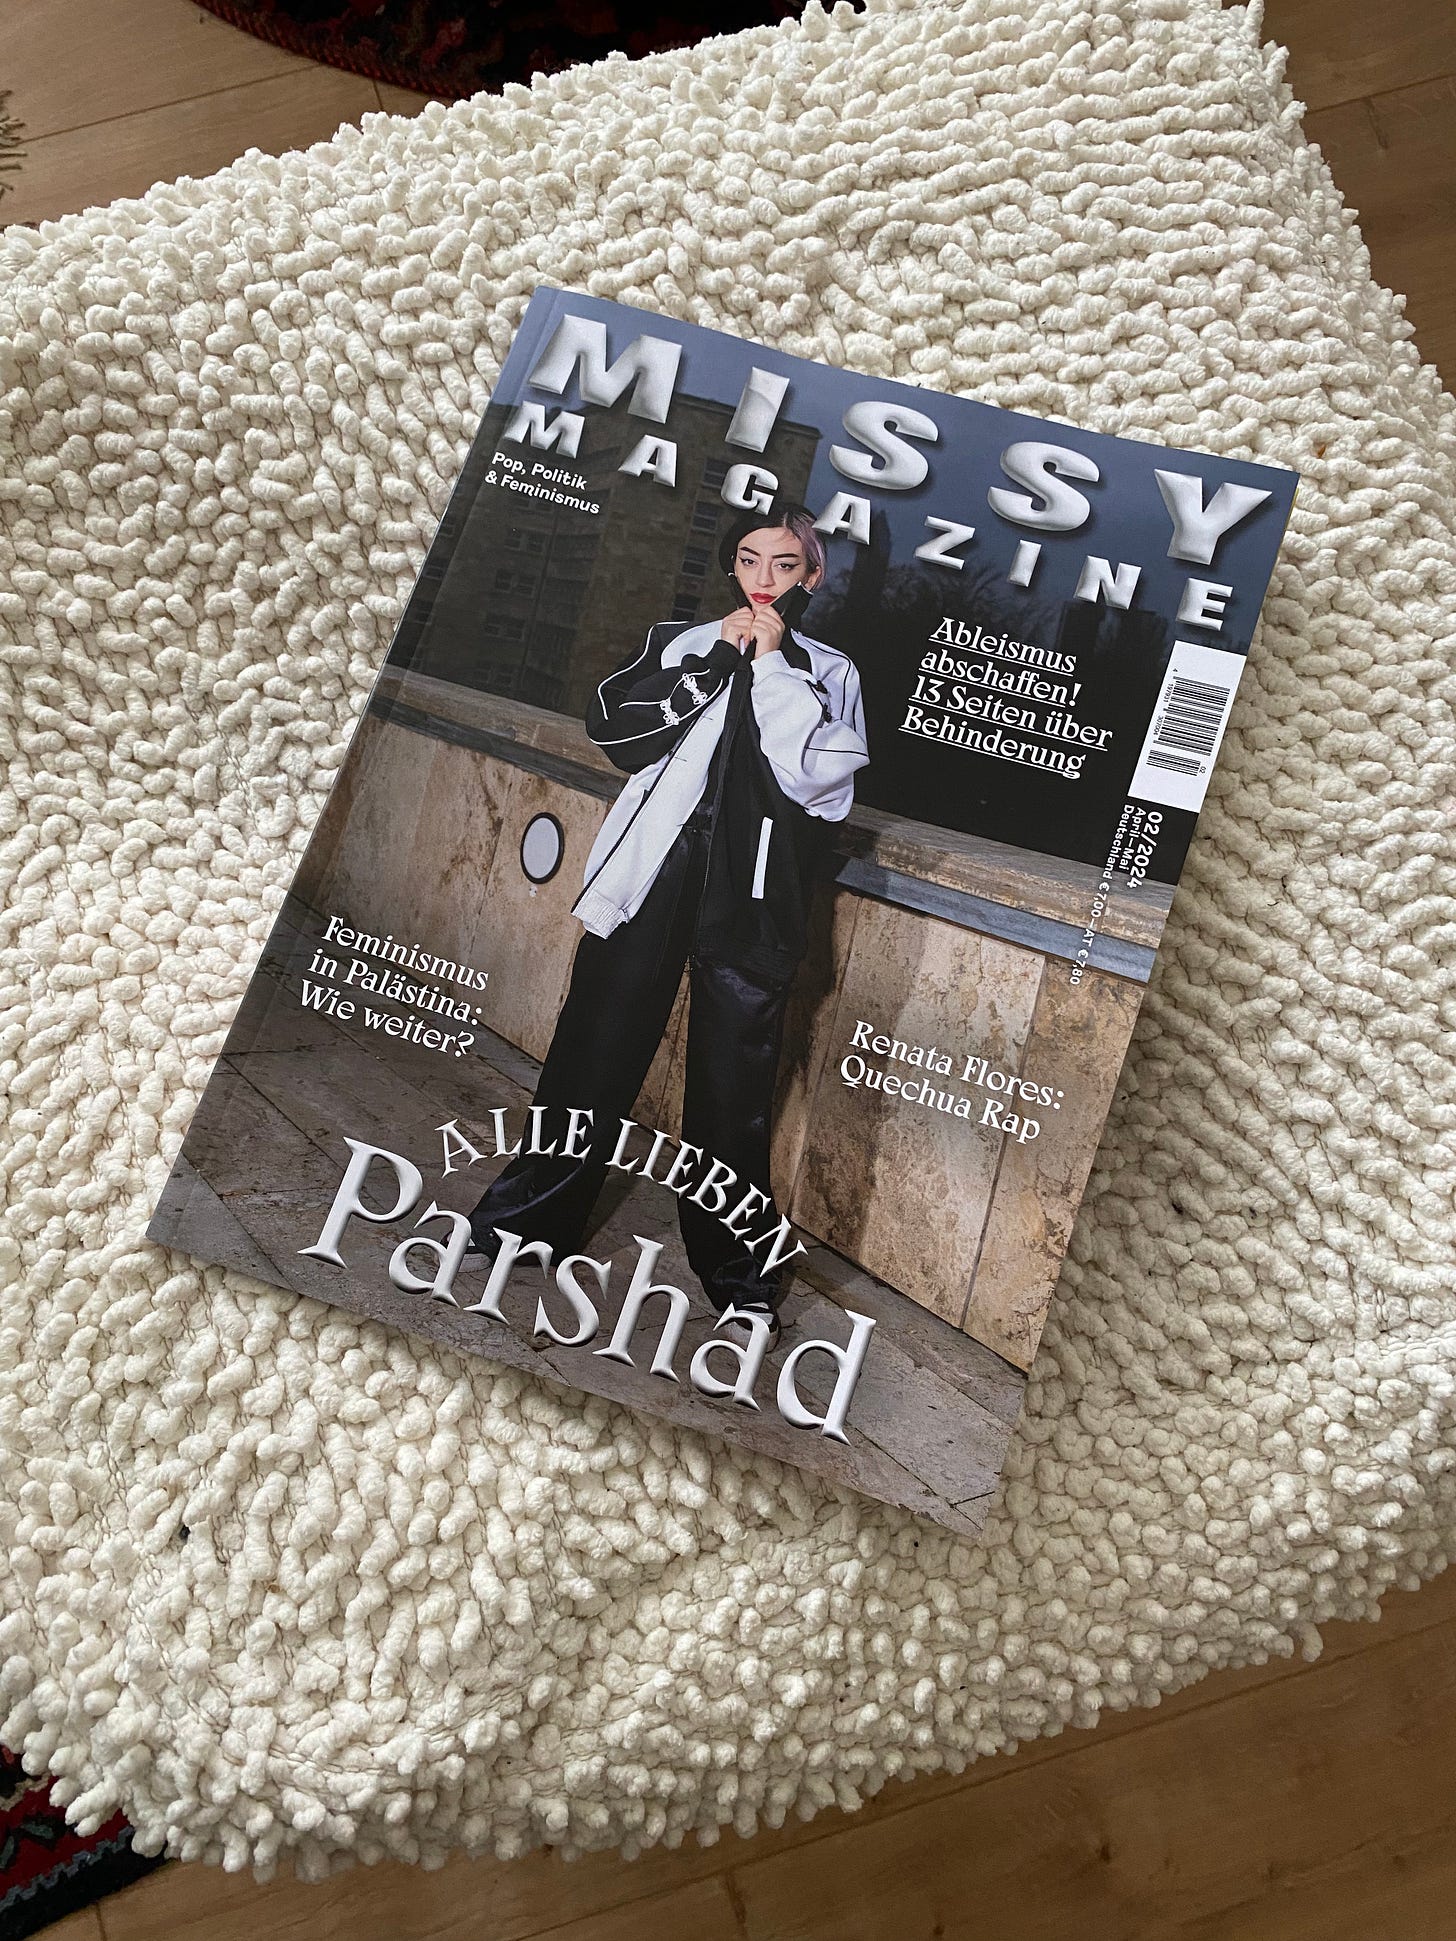 Missy magazine issue laid on a beige pouf. The cover shows the young female entertainer Parshad in a black and white outfit.